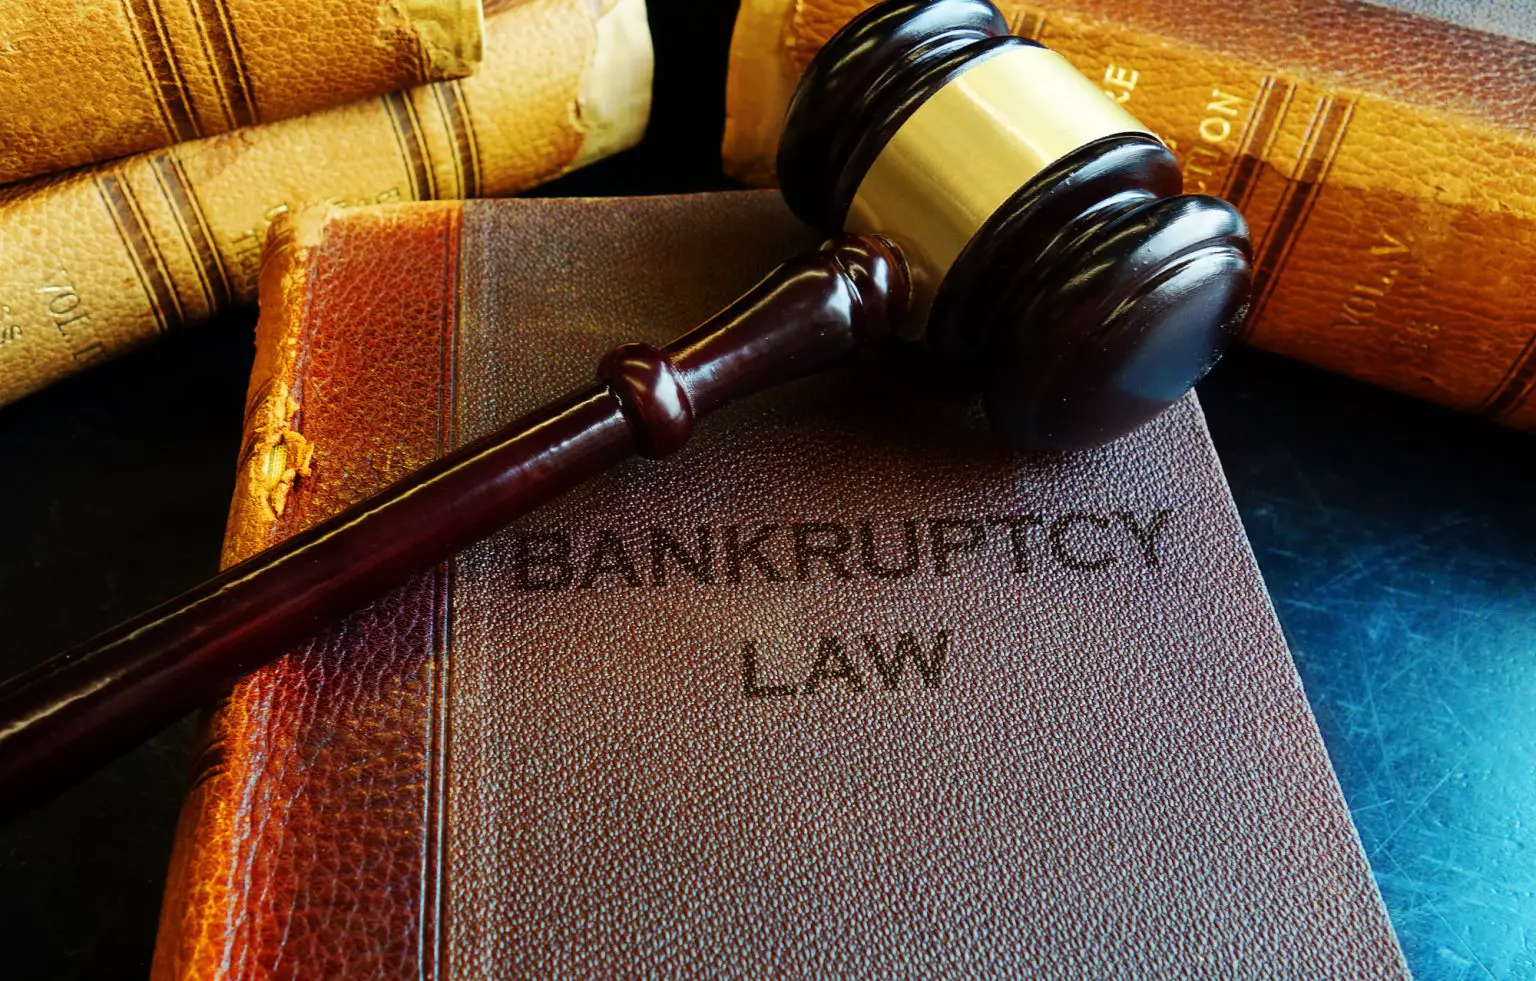 What Exactly Does a Bankruptcy Attorney Do?